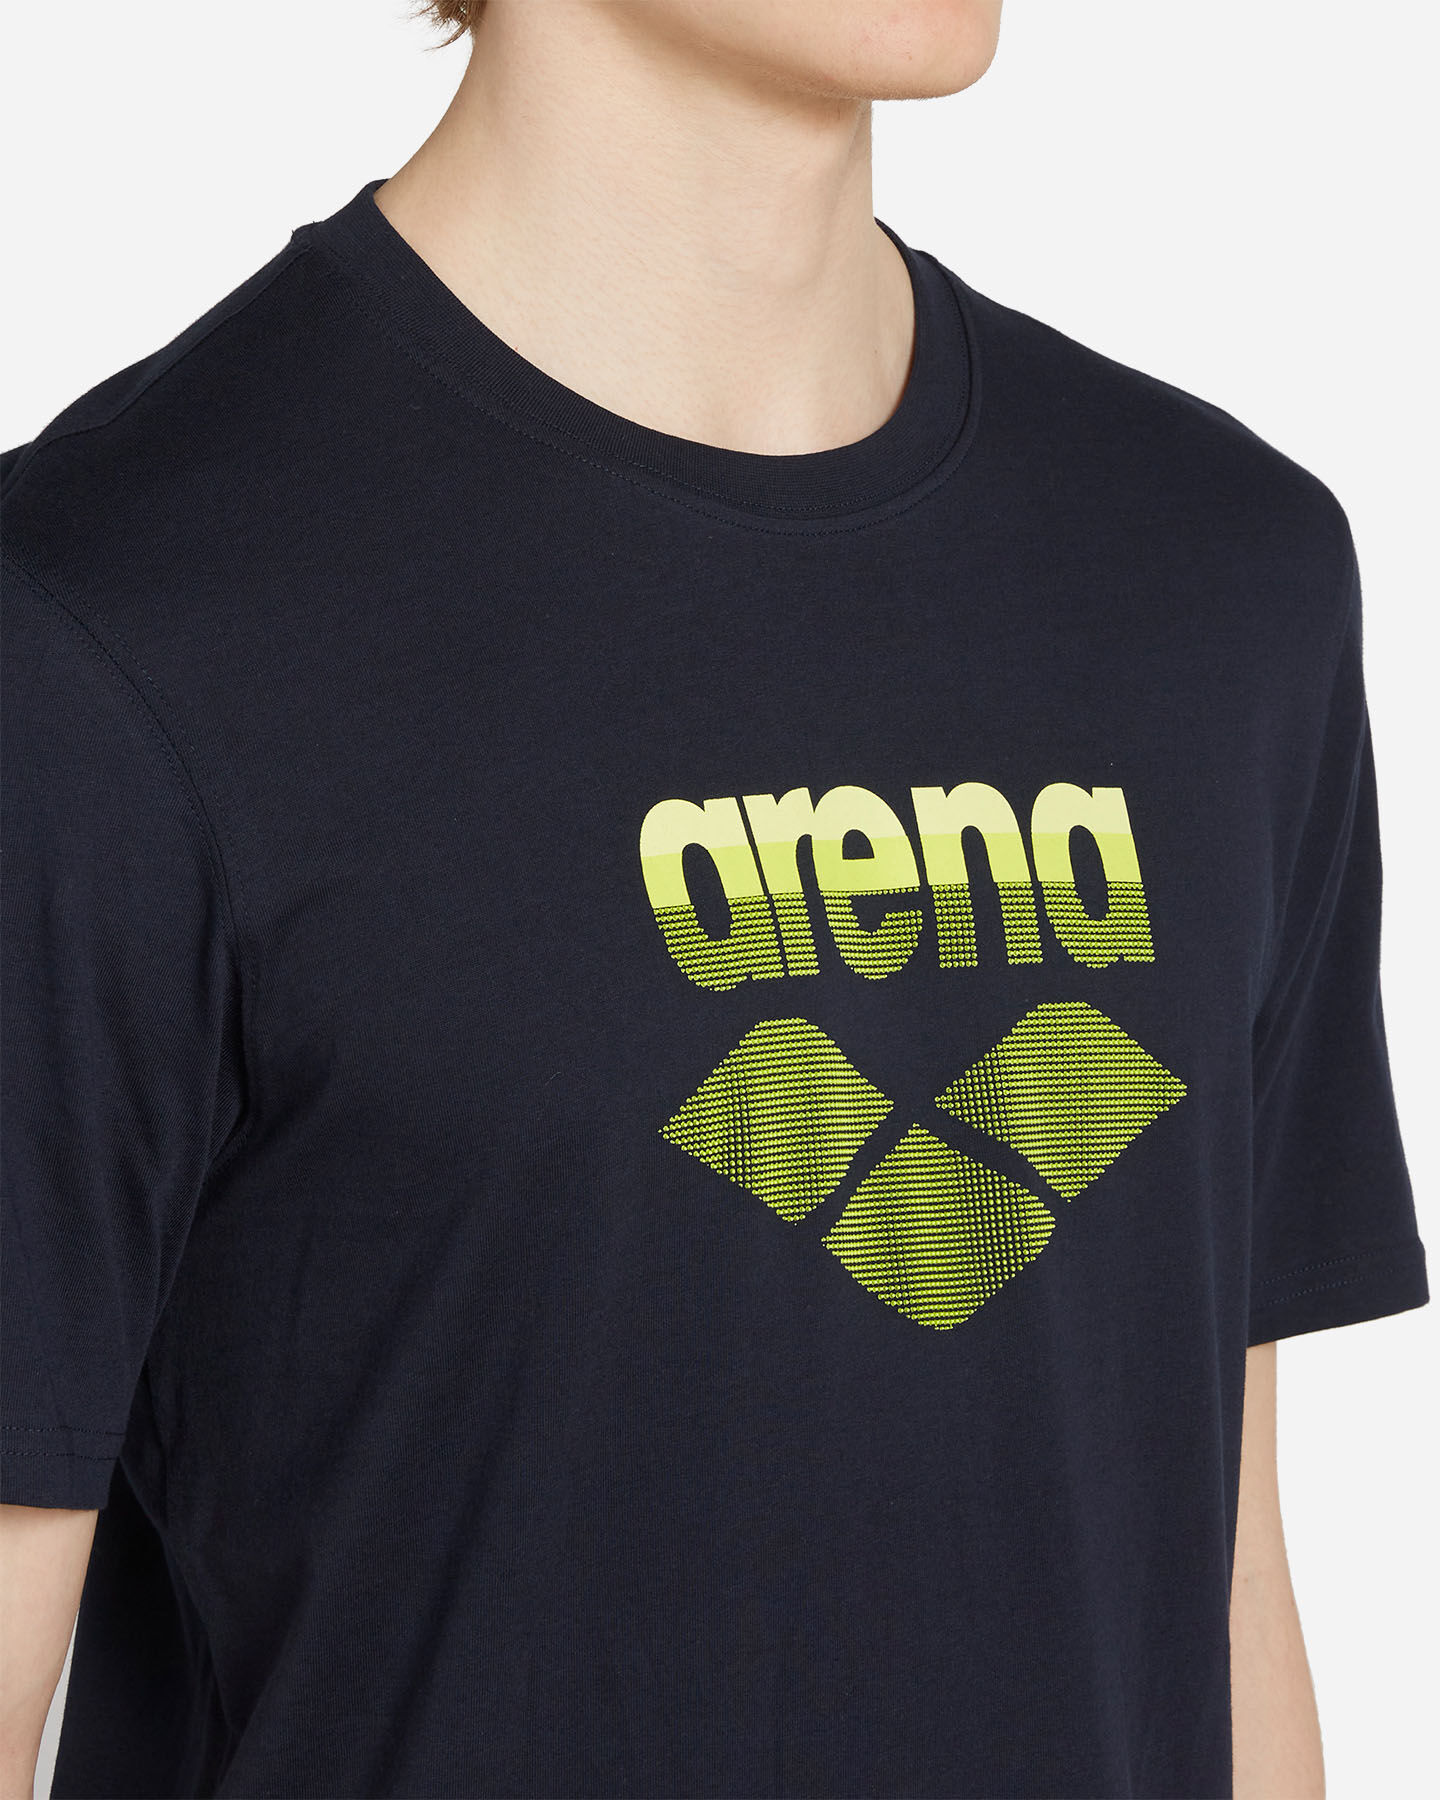  T-Shirt ARENA ATHLETIC M S4118134|914|S scatto 4